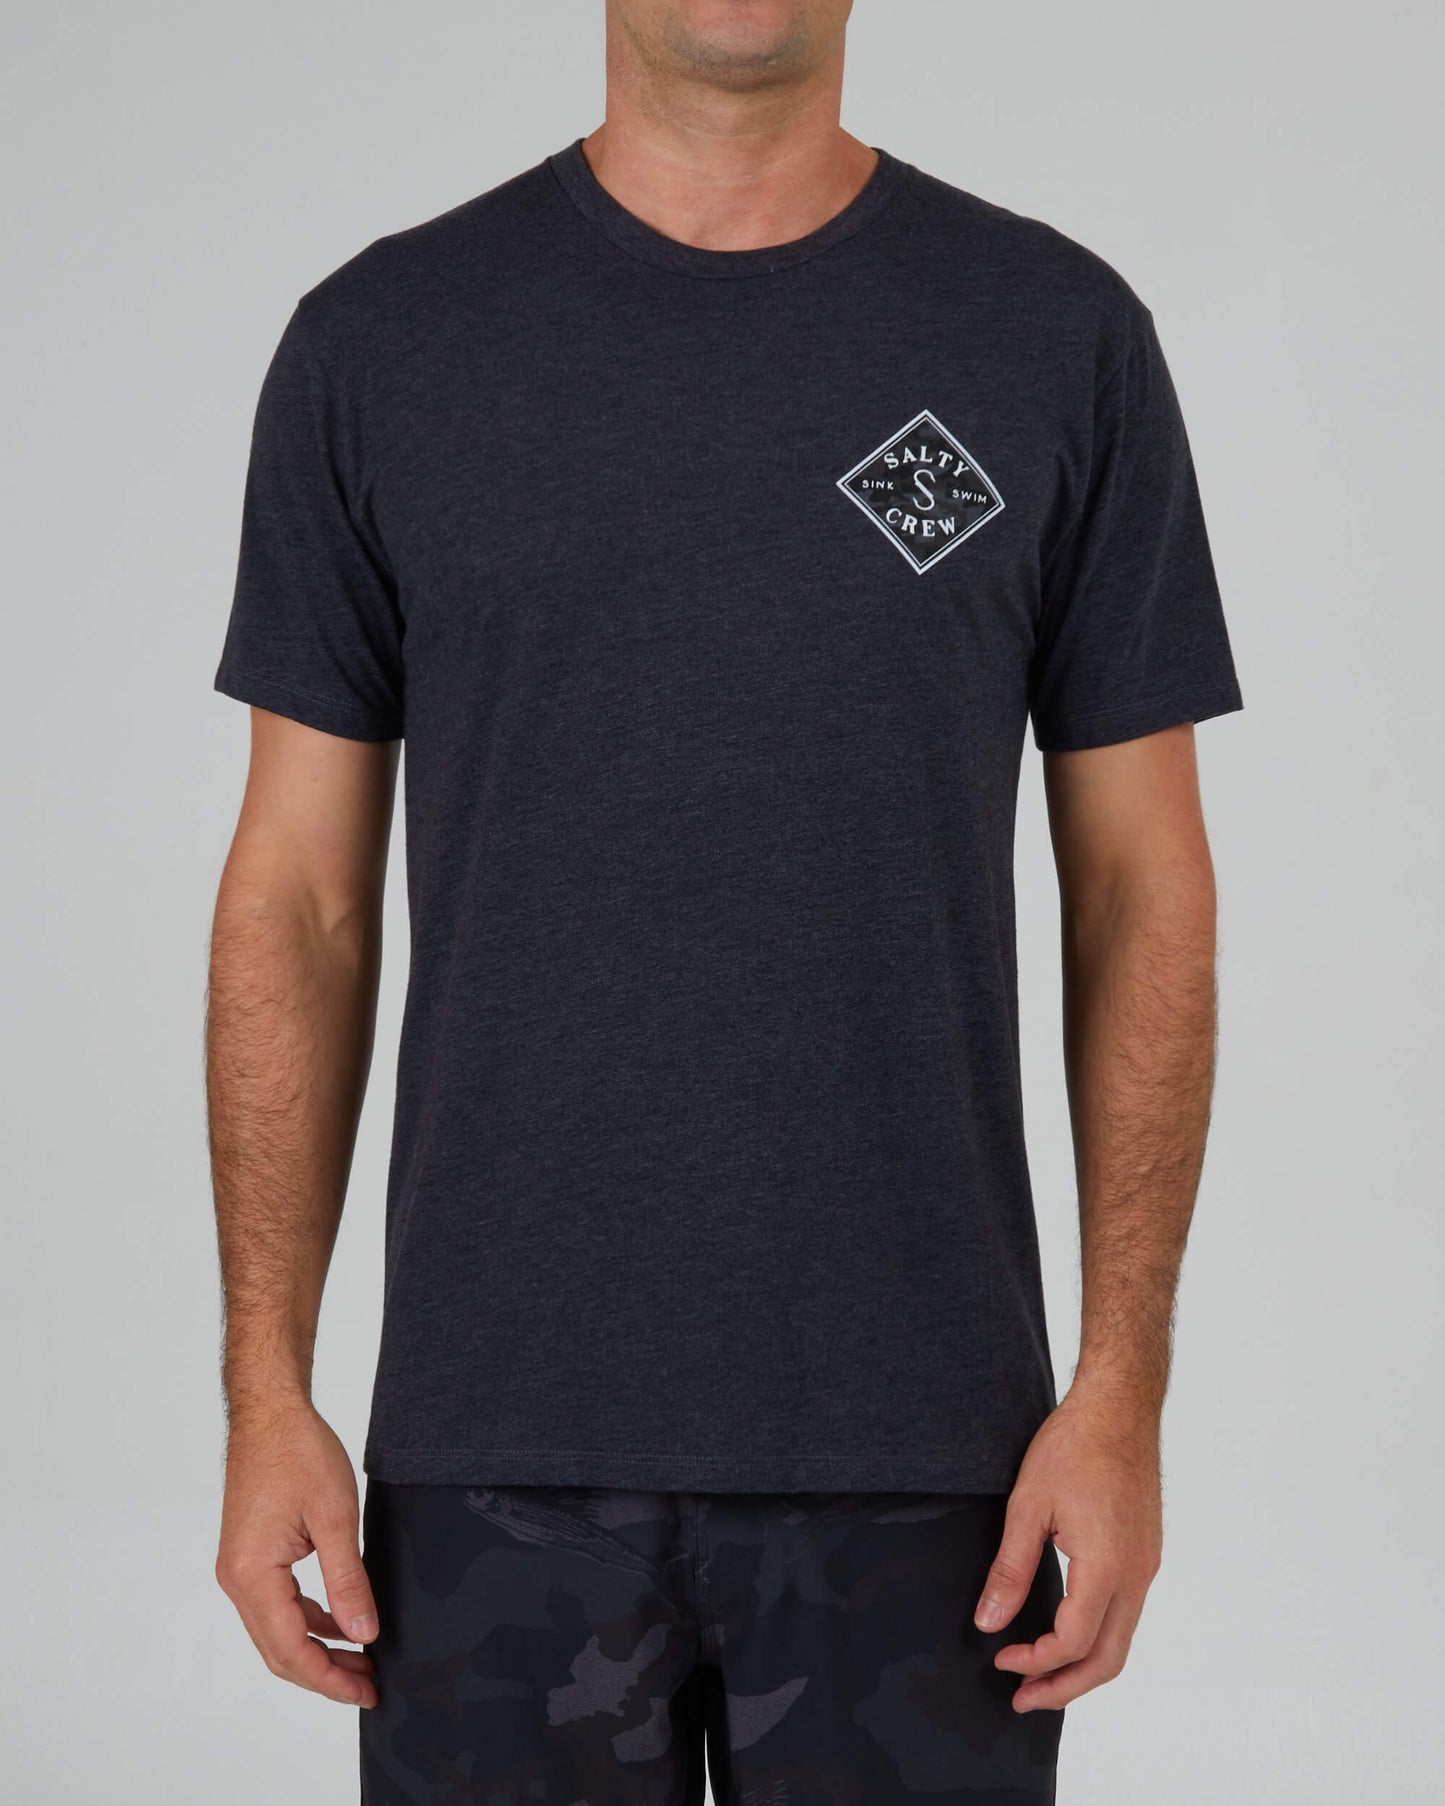 Salty crew T-SHIRTS S/S Tippet Camo Fill Prem S/S Tee - Charcoal Heather in Charcoal Heather